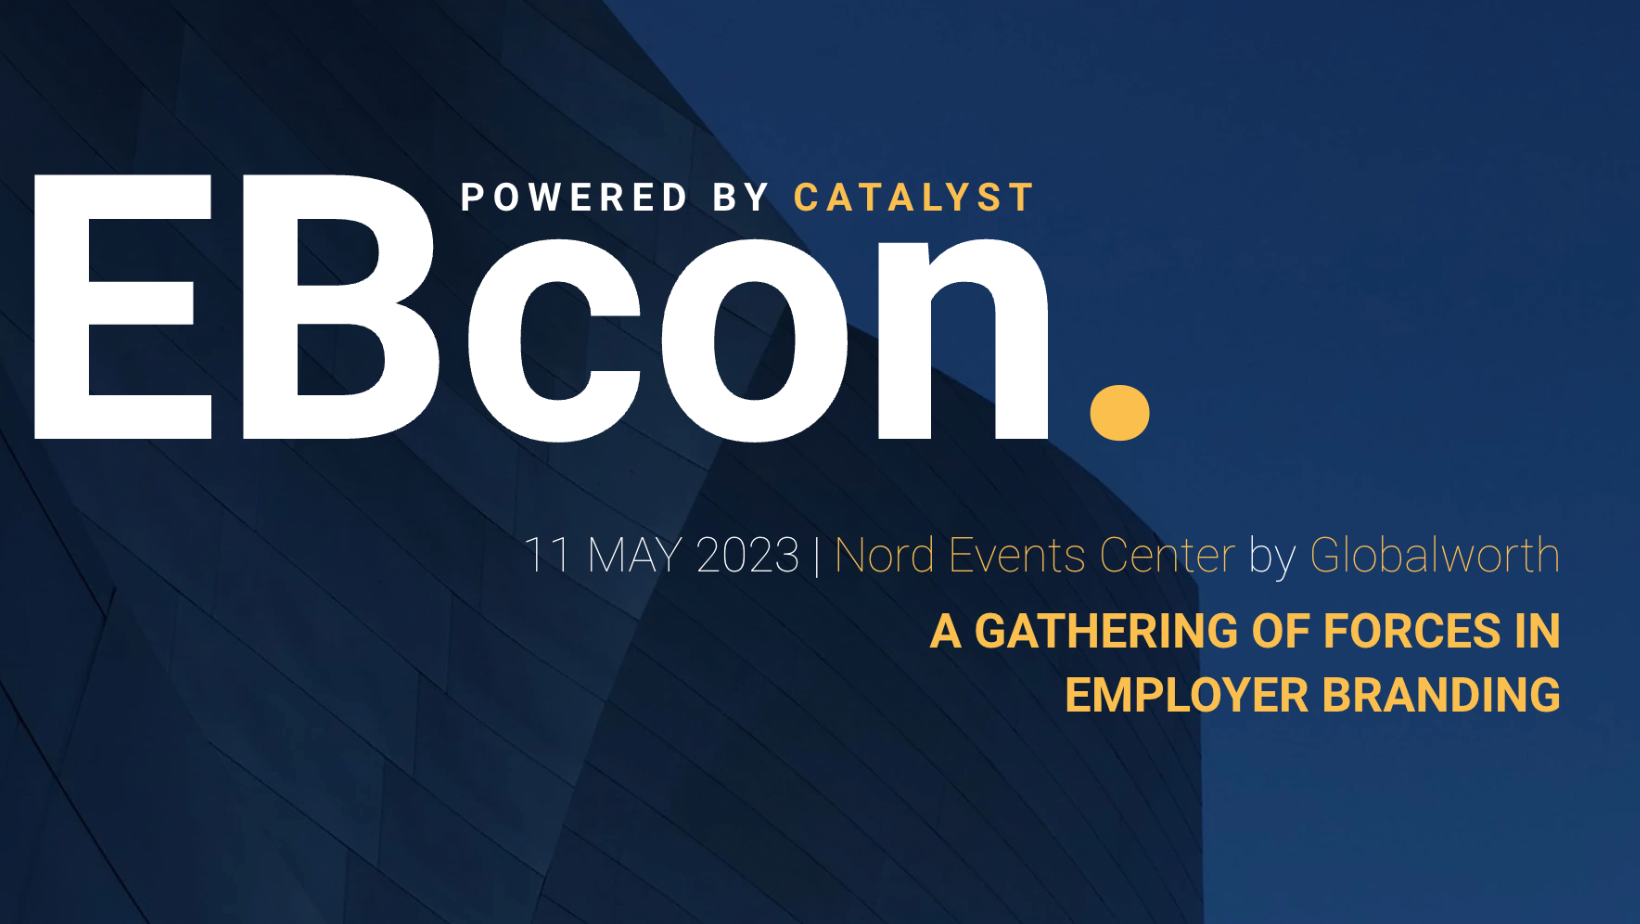 EBcon connects with Work Retreat